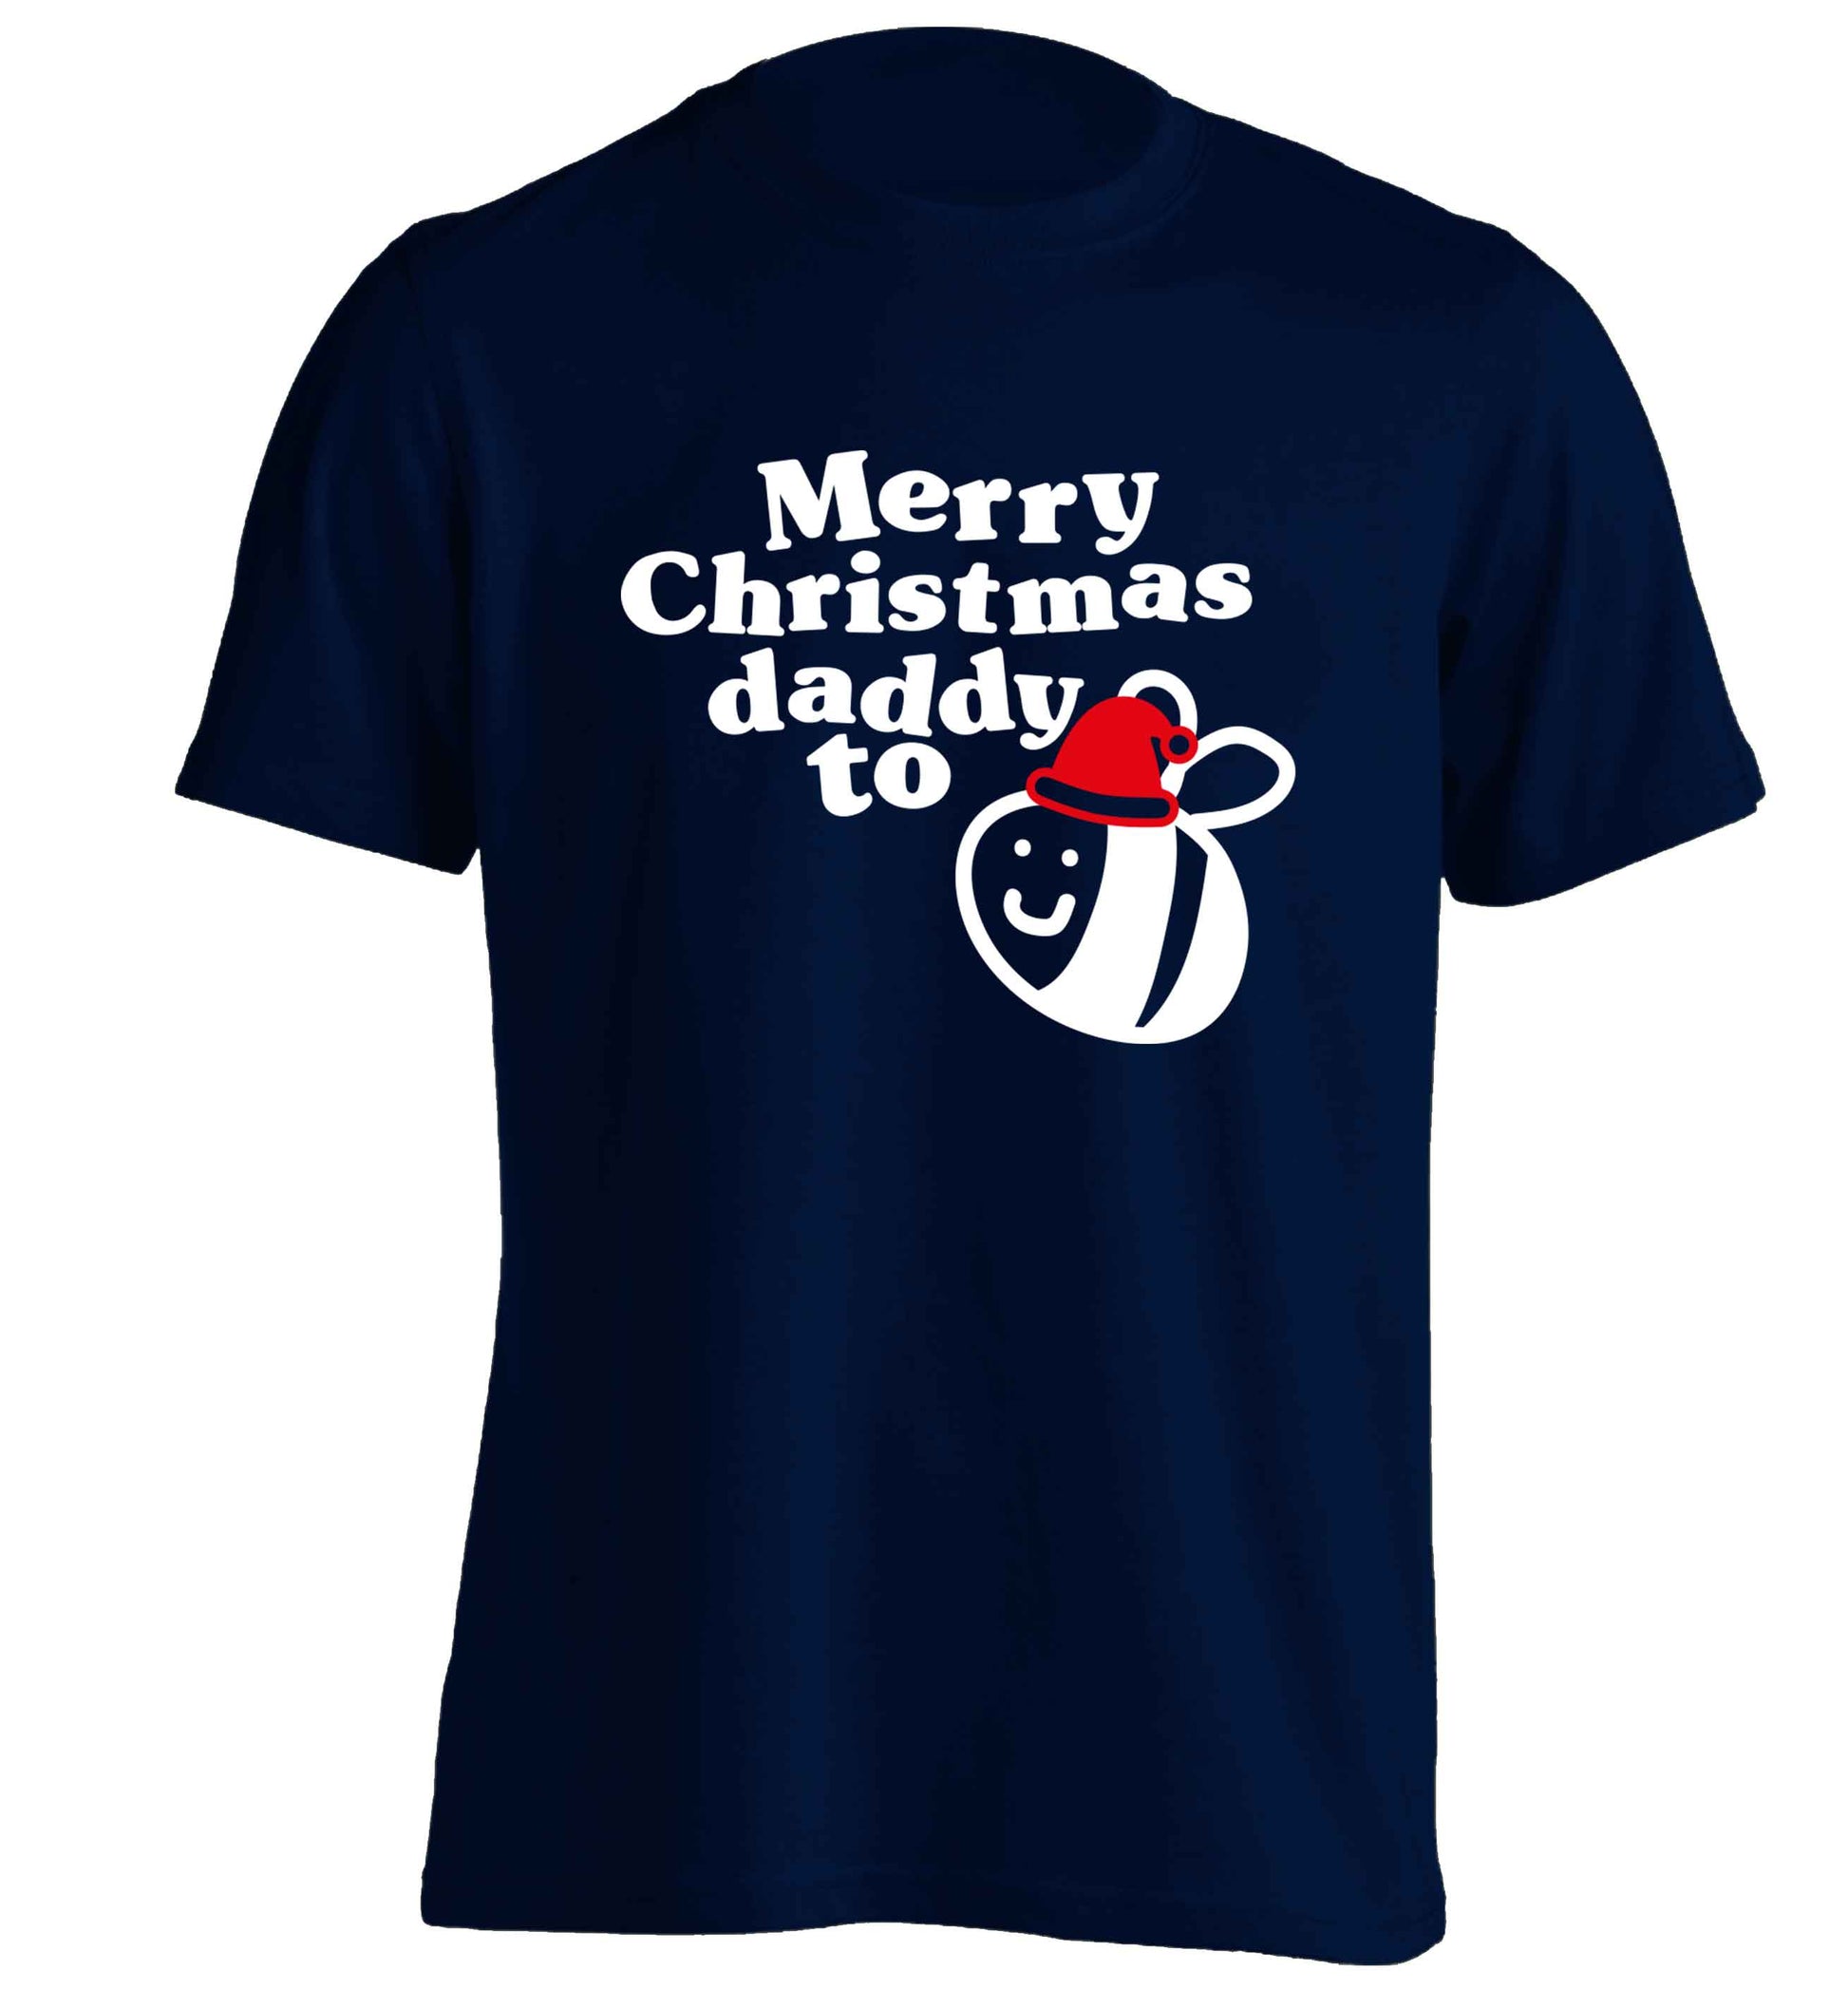 Merry Christmas daddy to be adults unisex navy Tshirt 2XL